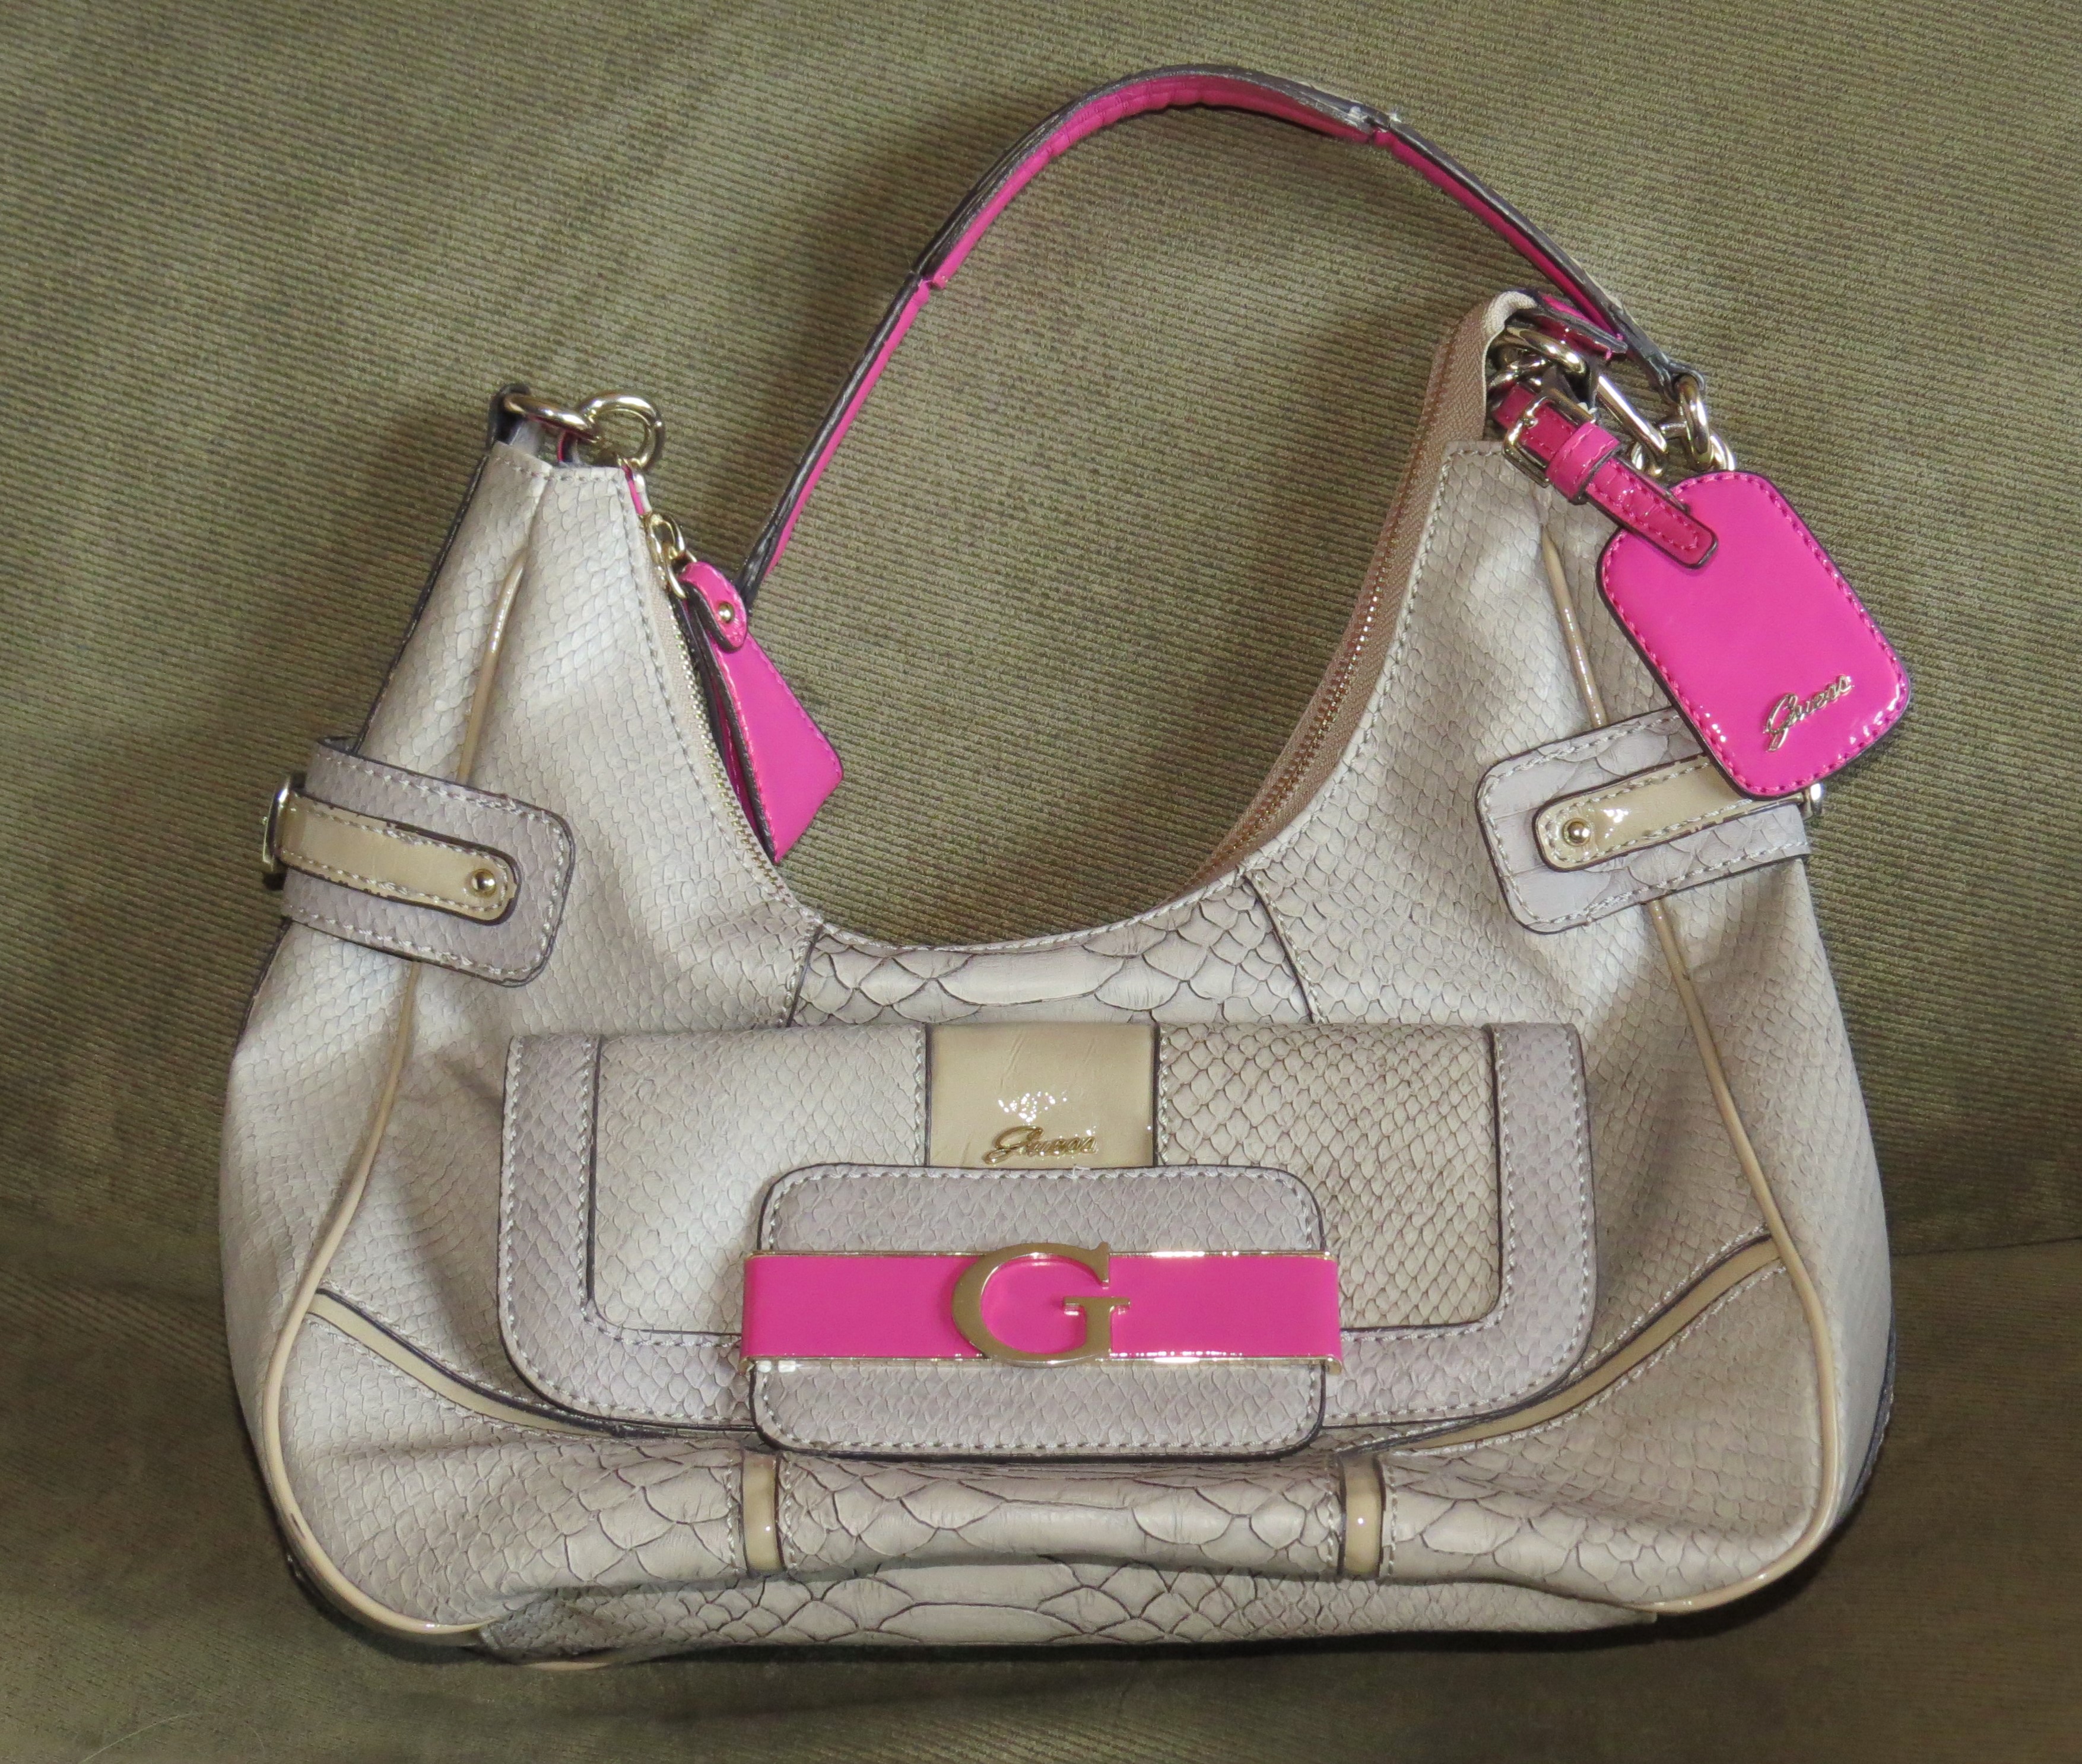 Guess Authenticated Leather Handbag